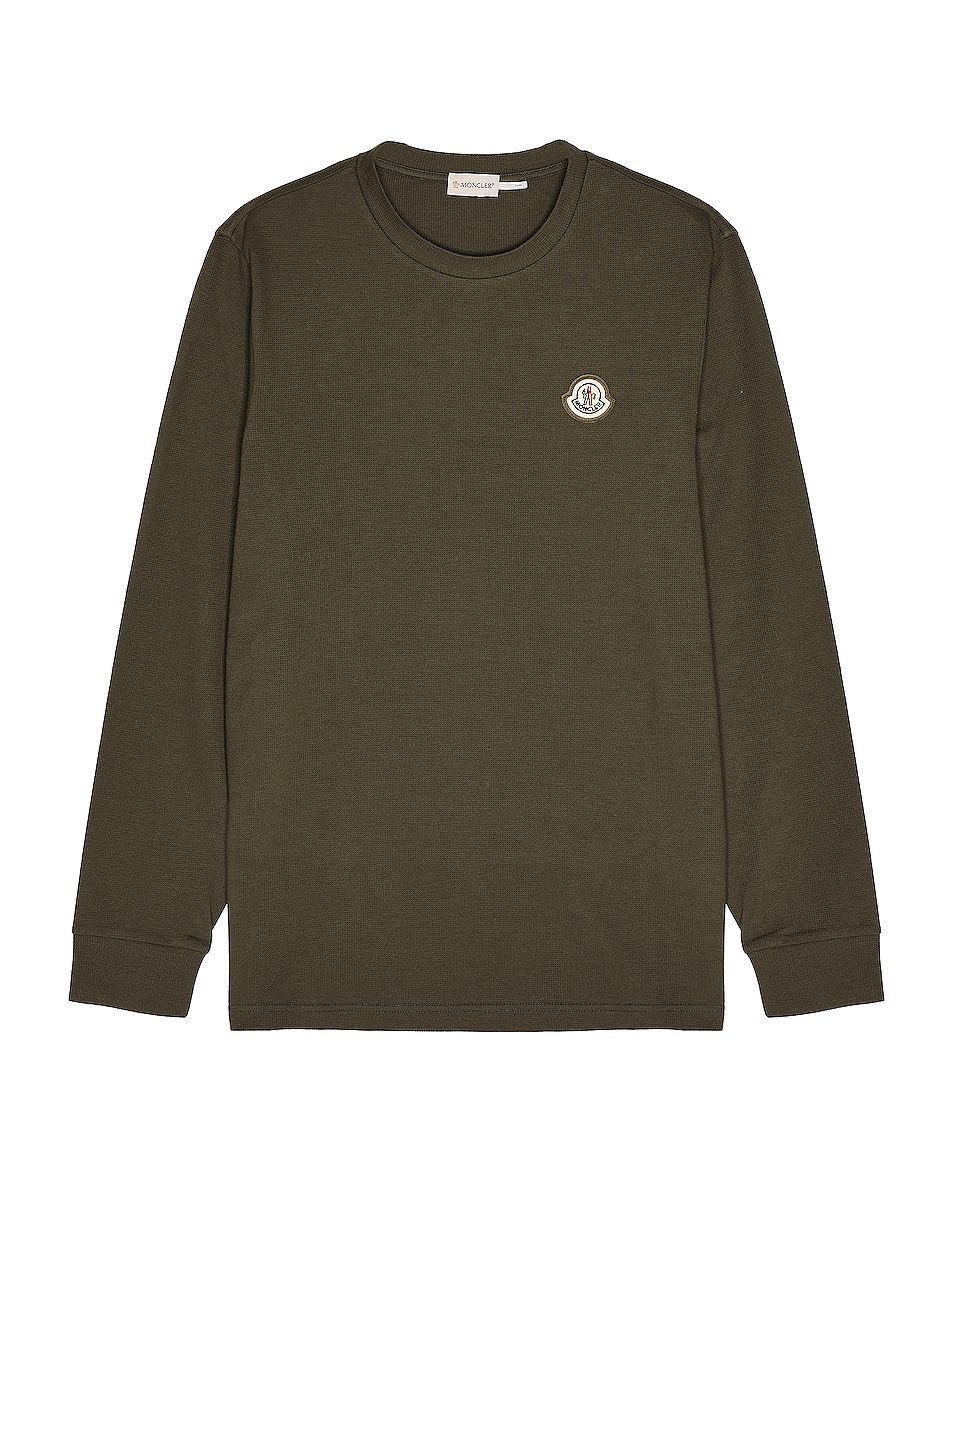 Moncler Long Sleeve T-Shirt in Olive | FWRD